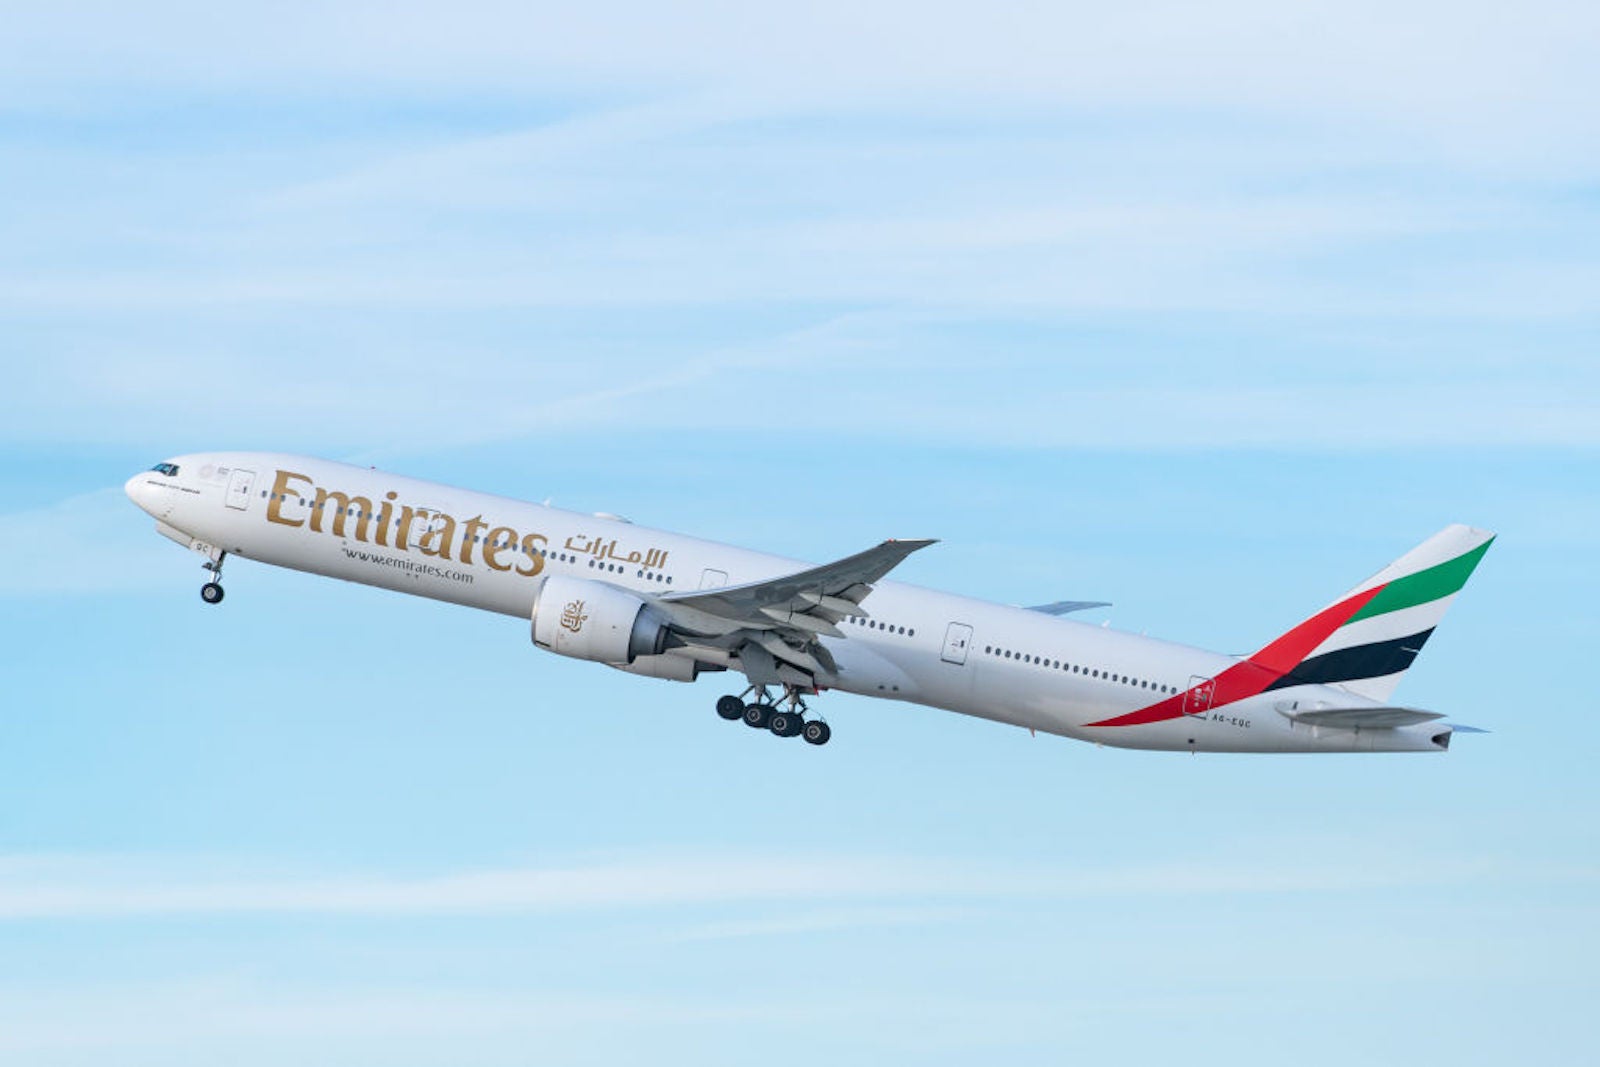 Emirates Boeing 777 taking off from LAX